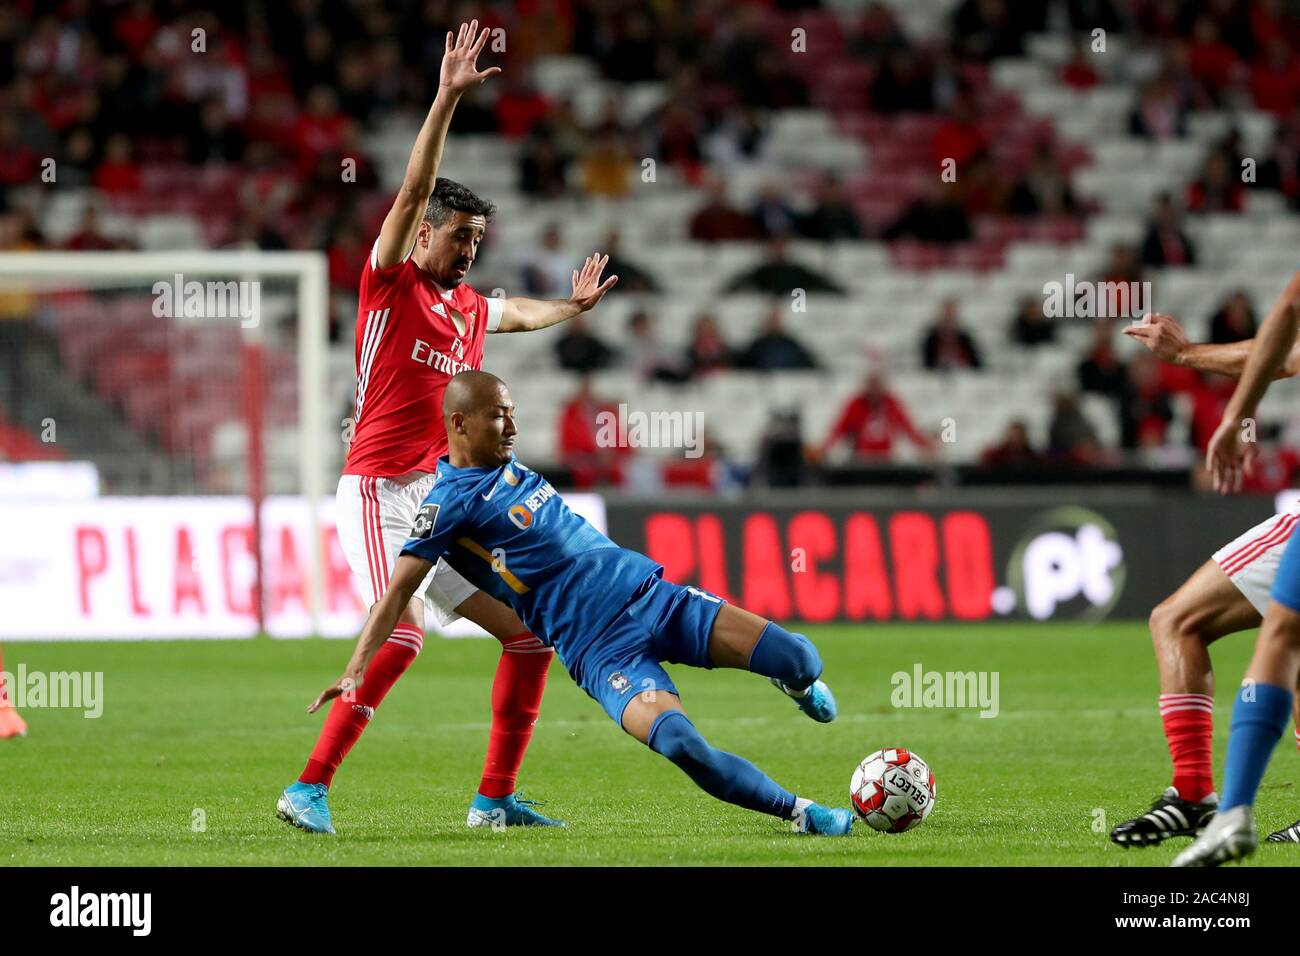 Lisbon, Portugal. 30th Nov, 2019. Andre Almeida (L) of Benfica vies with Daizen Maeda of Maritimo during their Portuguese League football match at the Luz stadium in Lisbon, Portugal, Nov. 30, 2019. Credit: Pedro Fiuza/Xinhua/Alamy Live News Stock Photo